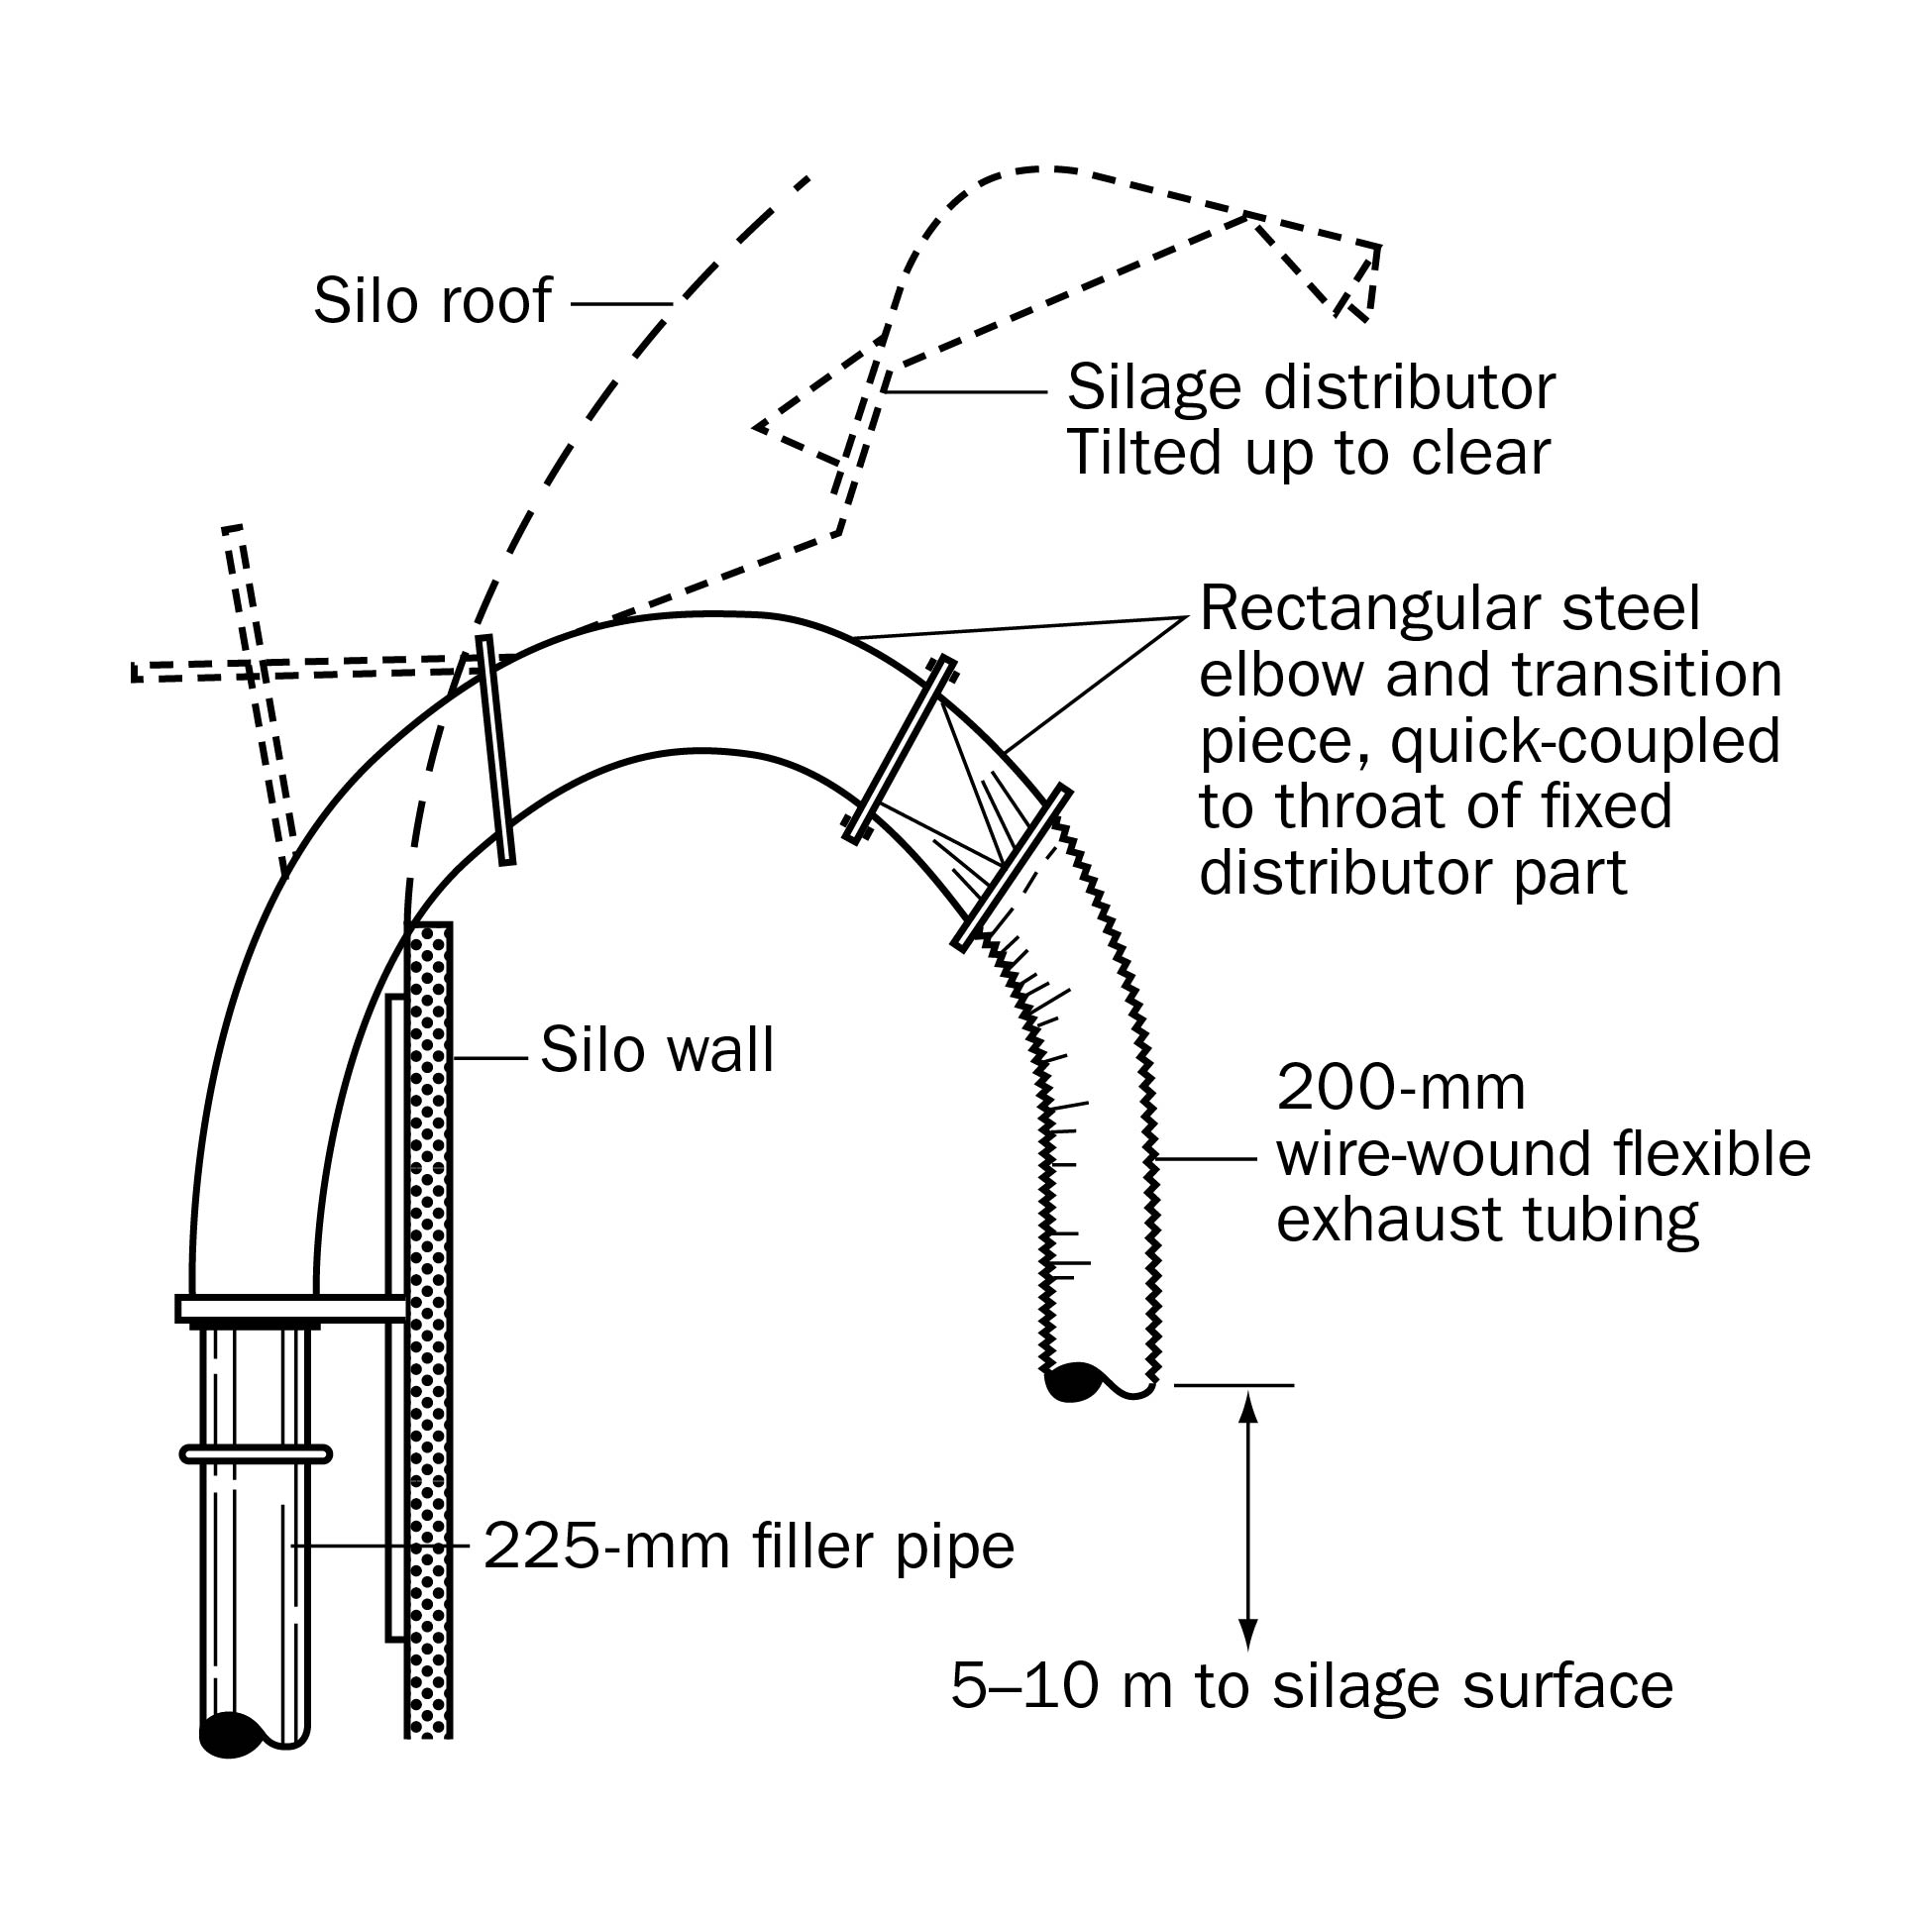 a suggested ventilation adapter for silos equipped with fin-type distributors